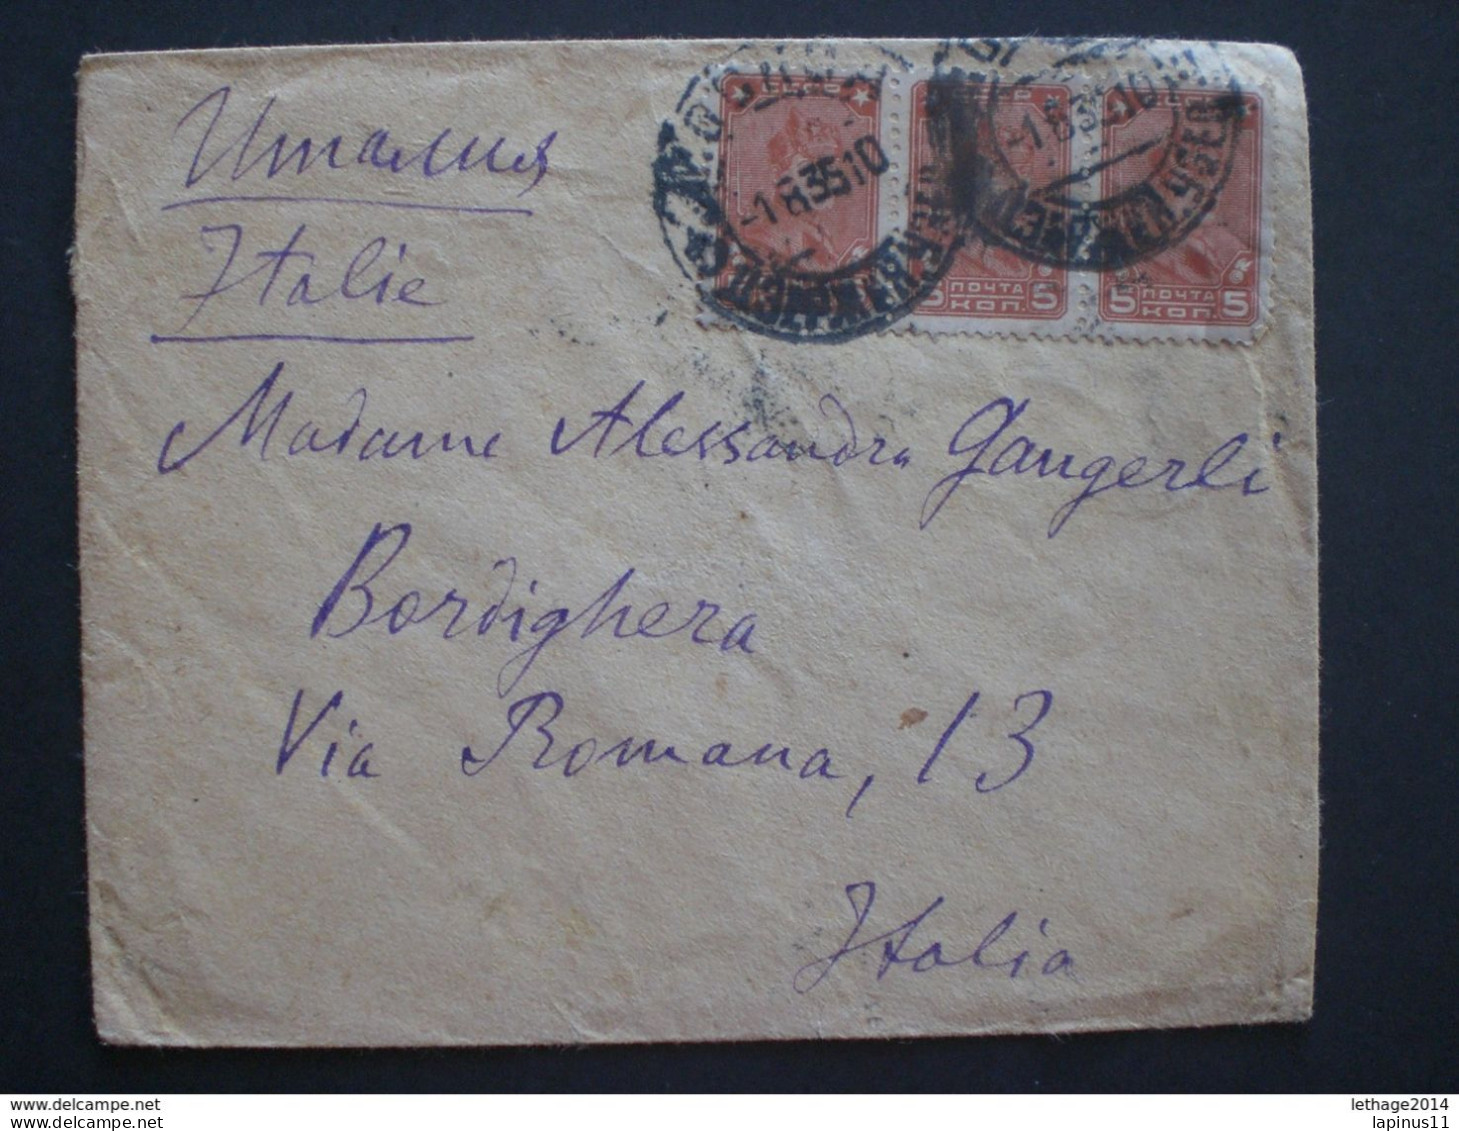 RUSSIA RUSSIE РОССИЯ STAMPS COVER 1935 Registered Mail RUSSIE TO ITALY RRR RIF.TAGG. (11) - Lettres & Documents